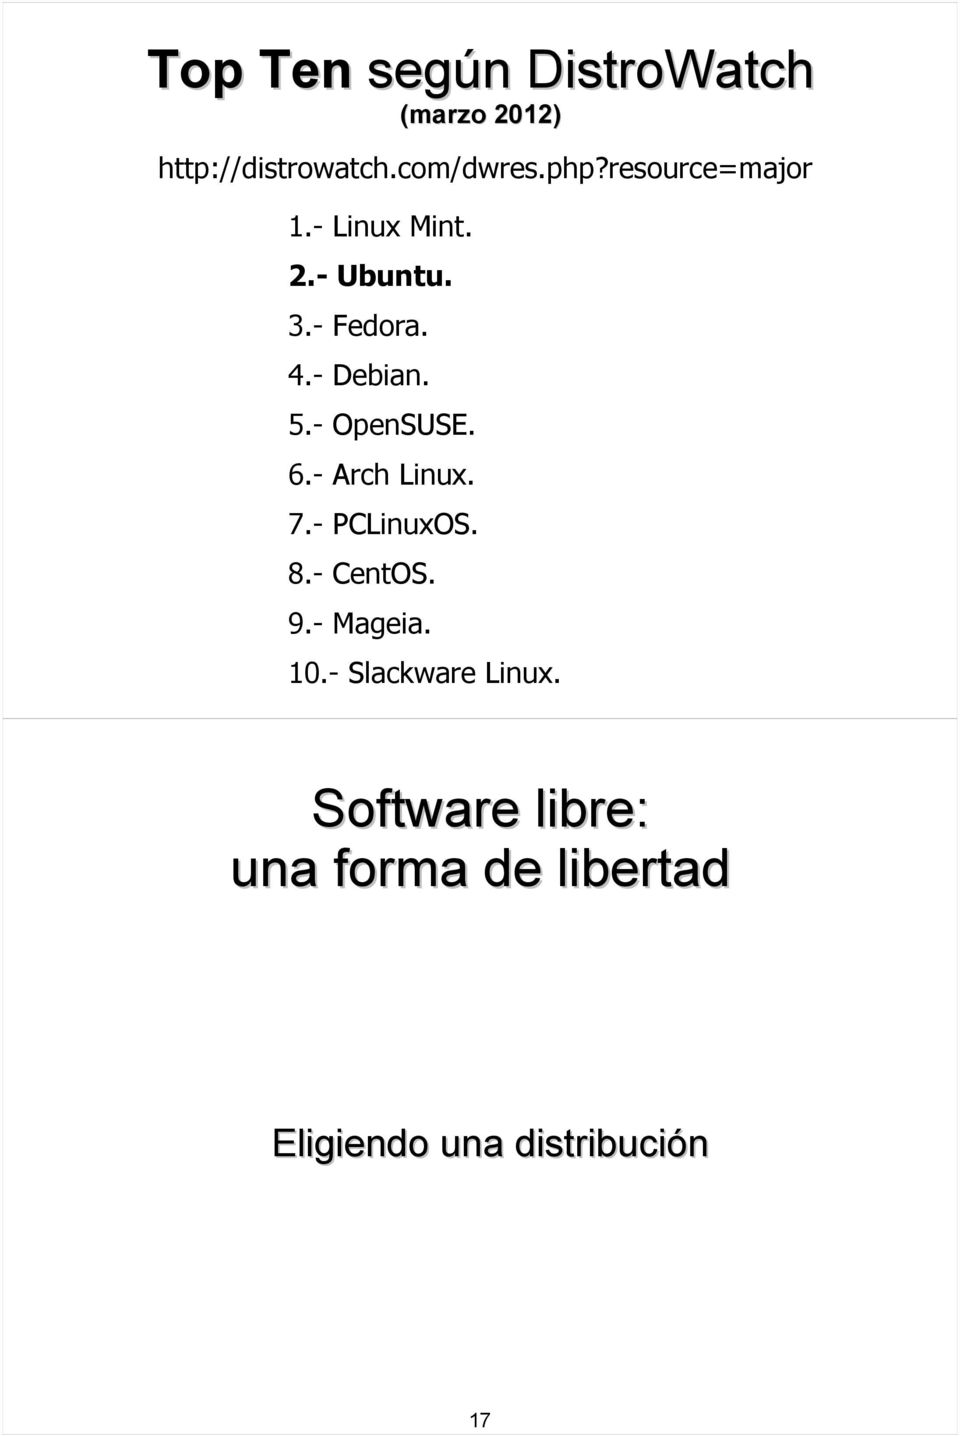 - OpenSUSE. 6.- Arch Linux. 7.- PCLinuxOS. 8.- CentOS. 9.- Mageia. 10.